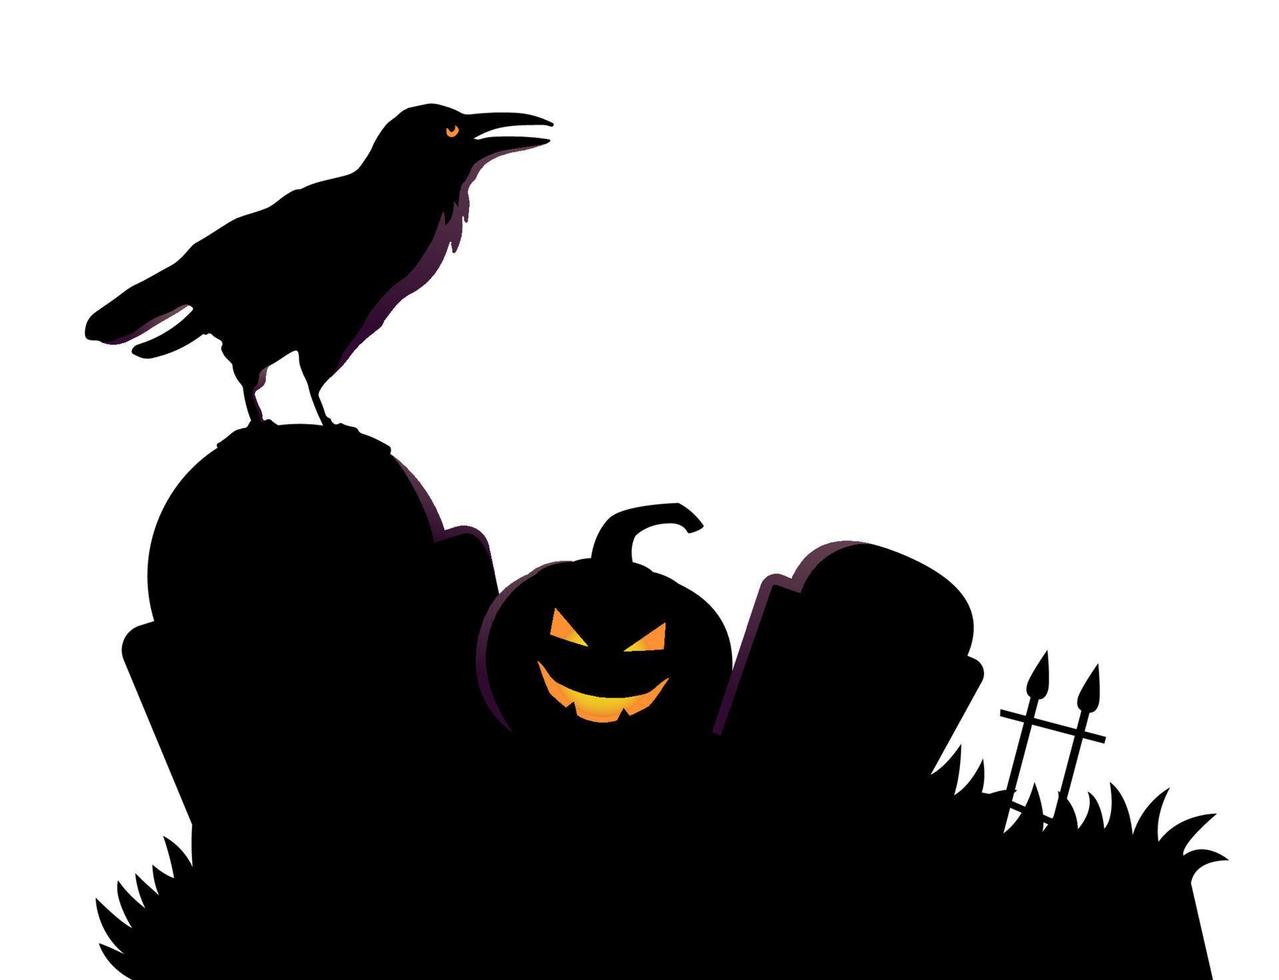 Midnight graveyard silhouette with crow and pumpkin. Spooky Halloween vector illustration.